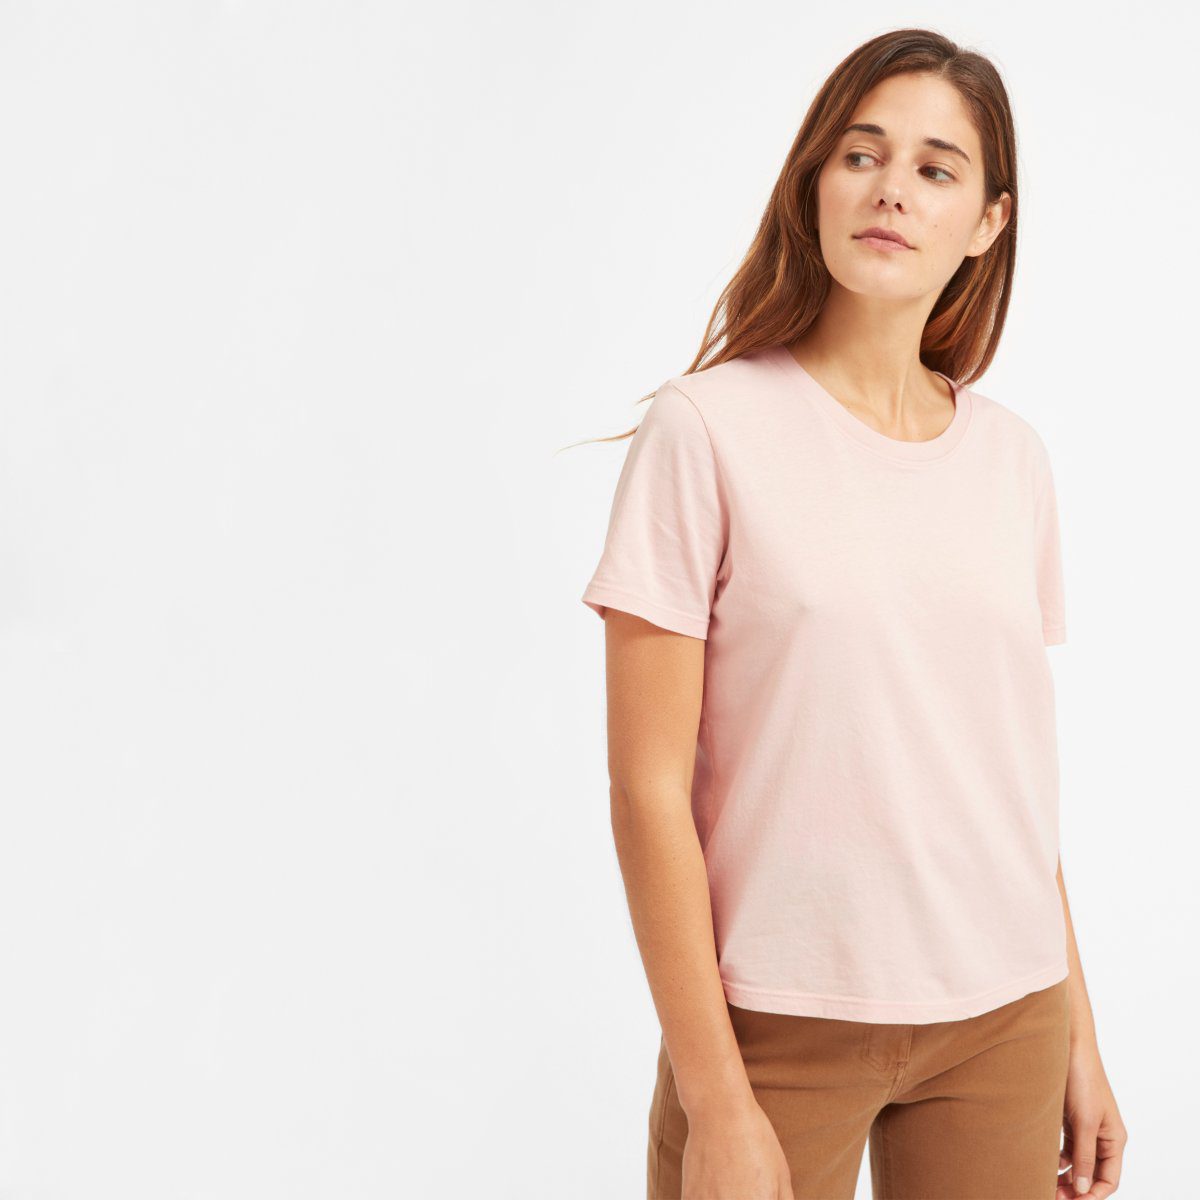 The Best Basic T-Shirts - Hither & Thither